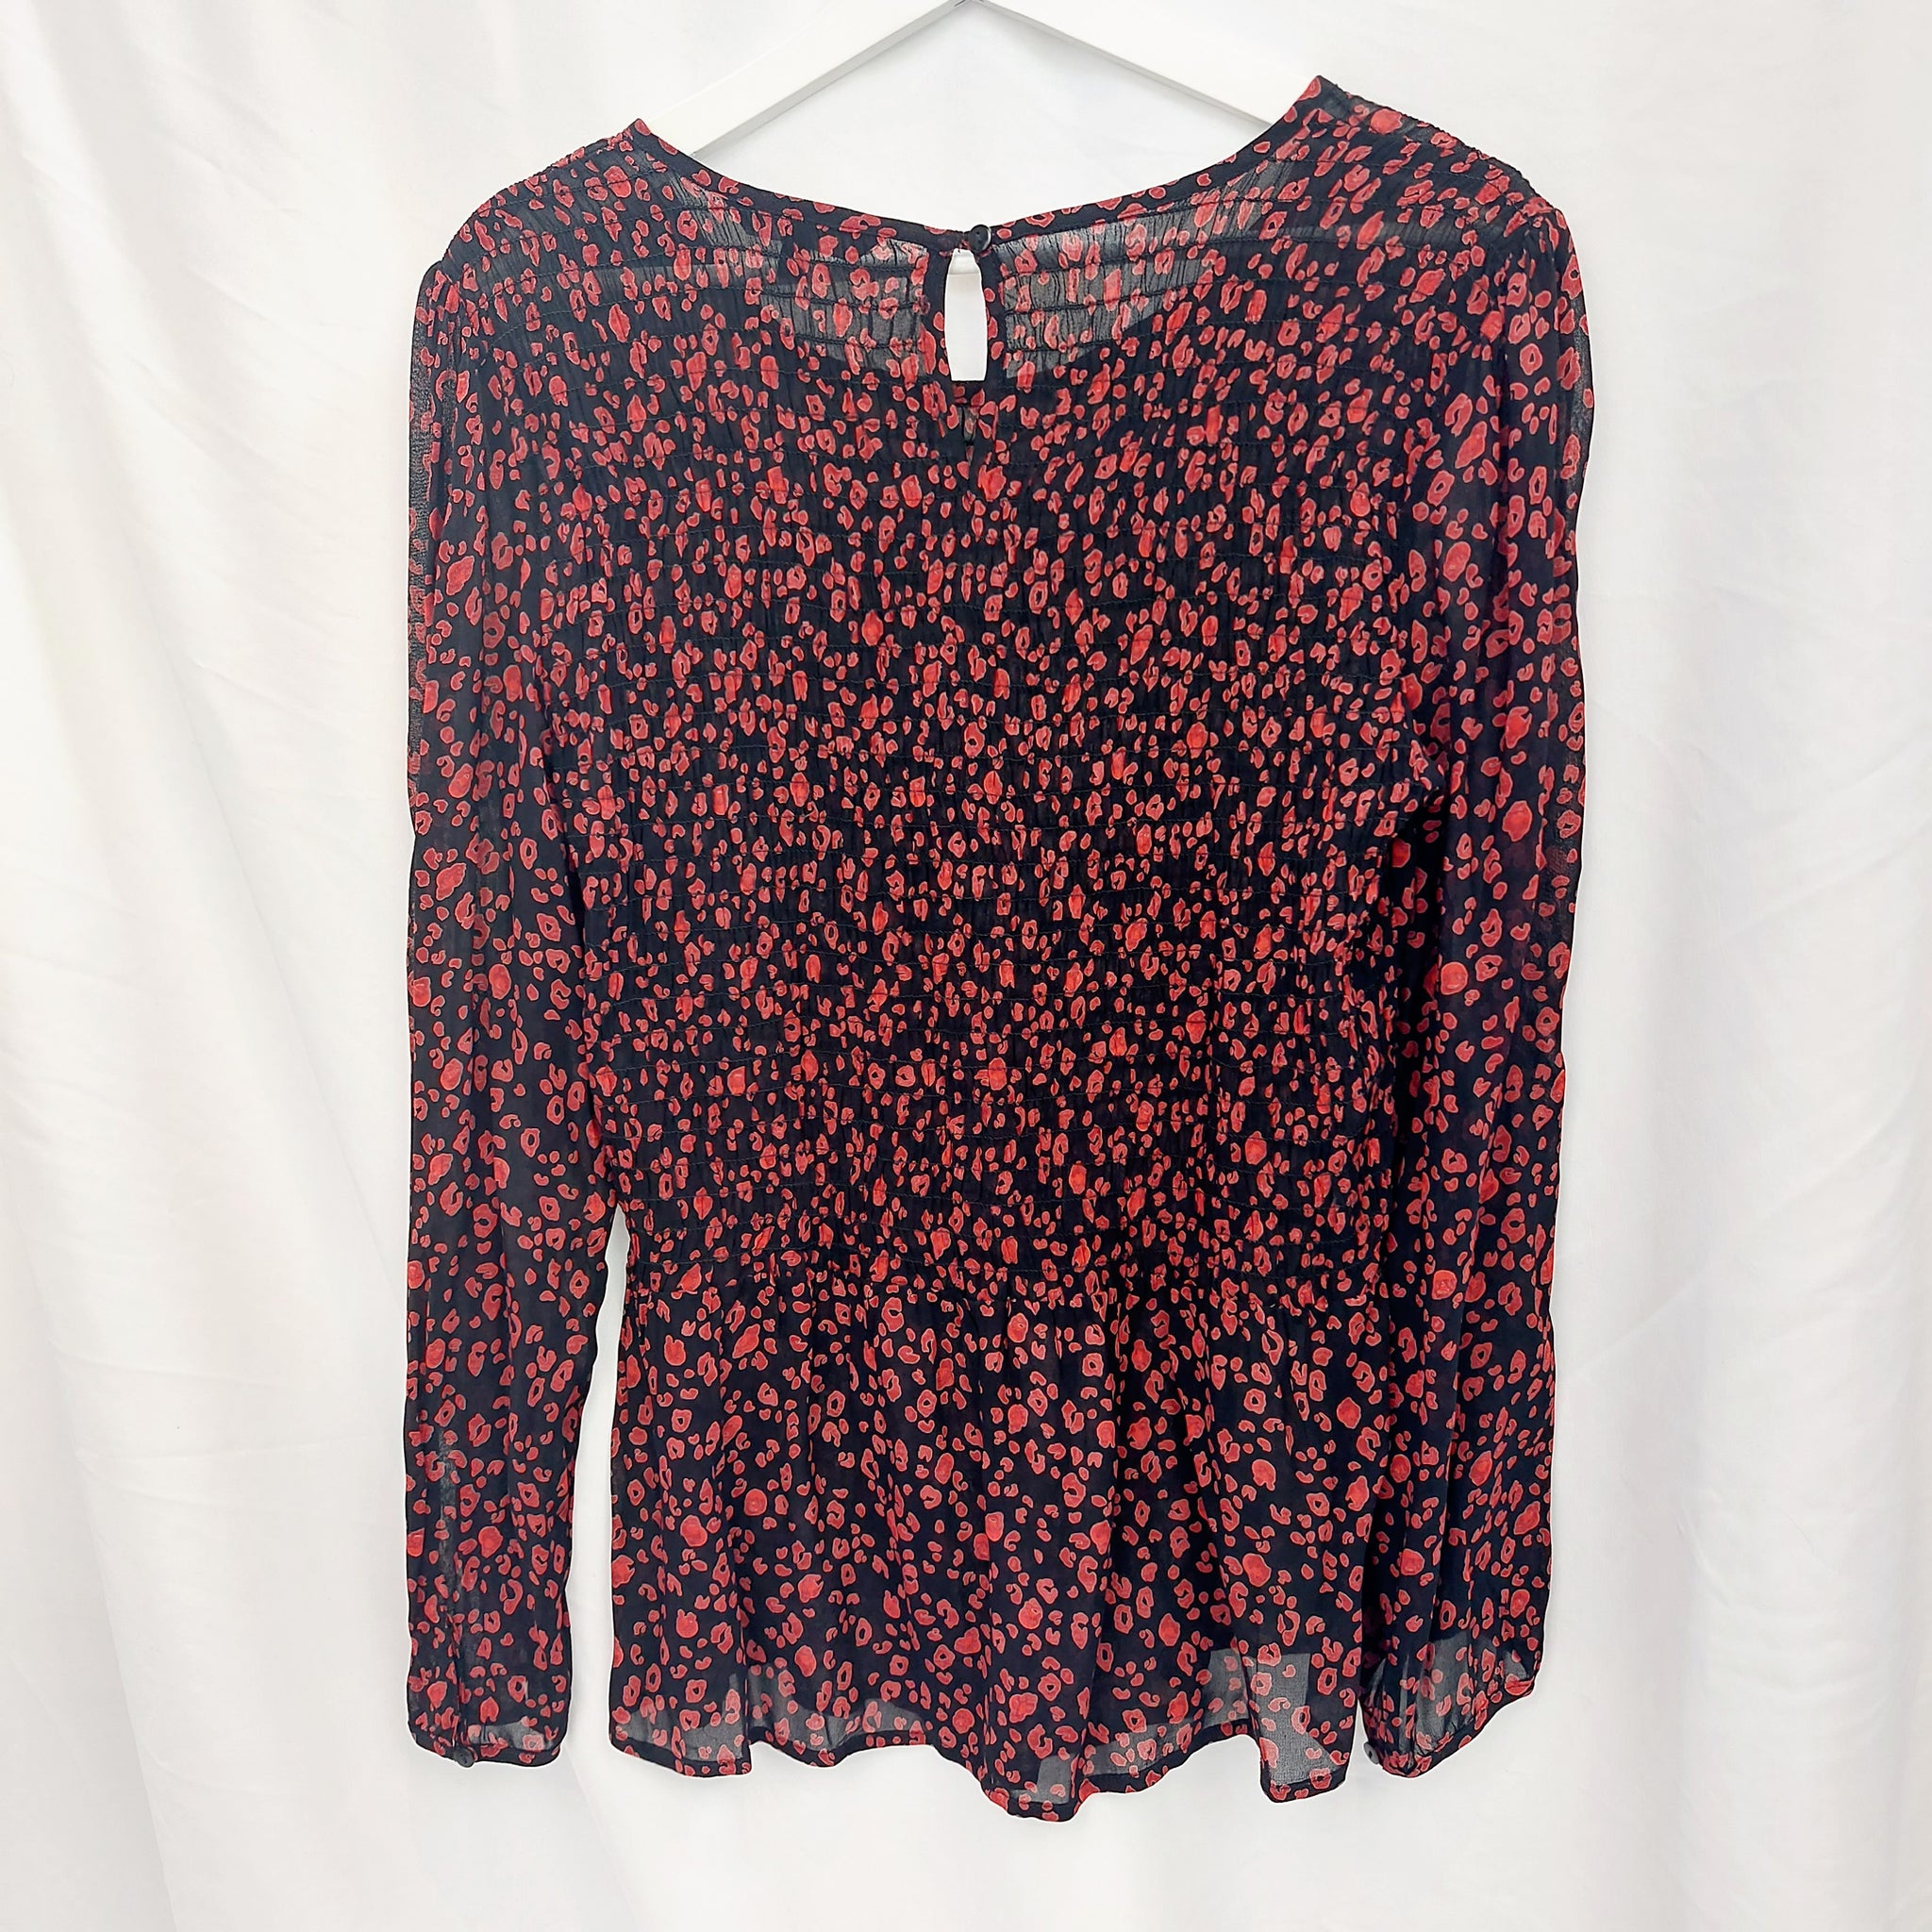 RED LEOPARD BLOUSE - UK12